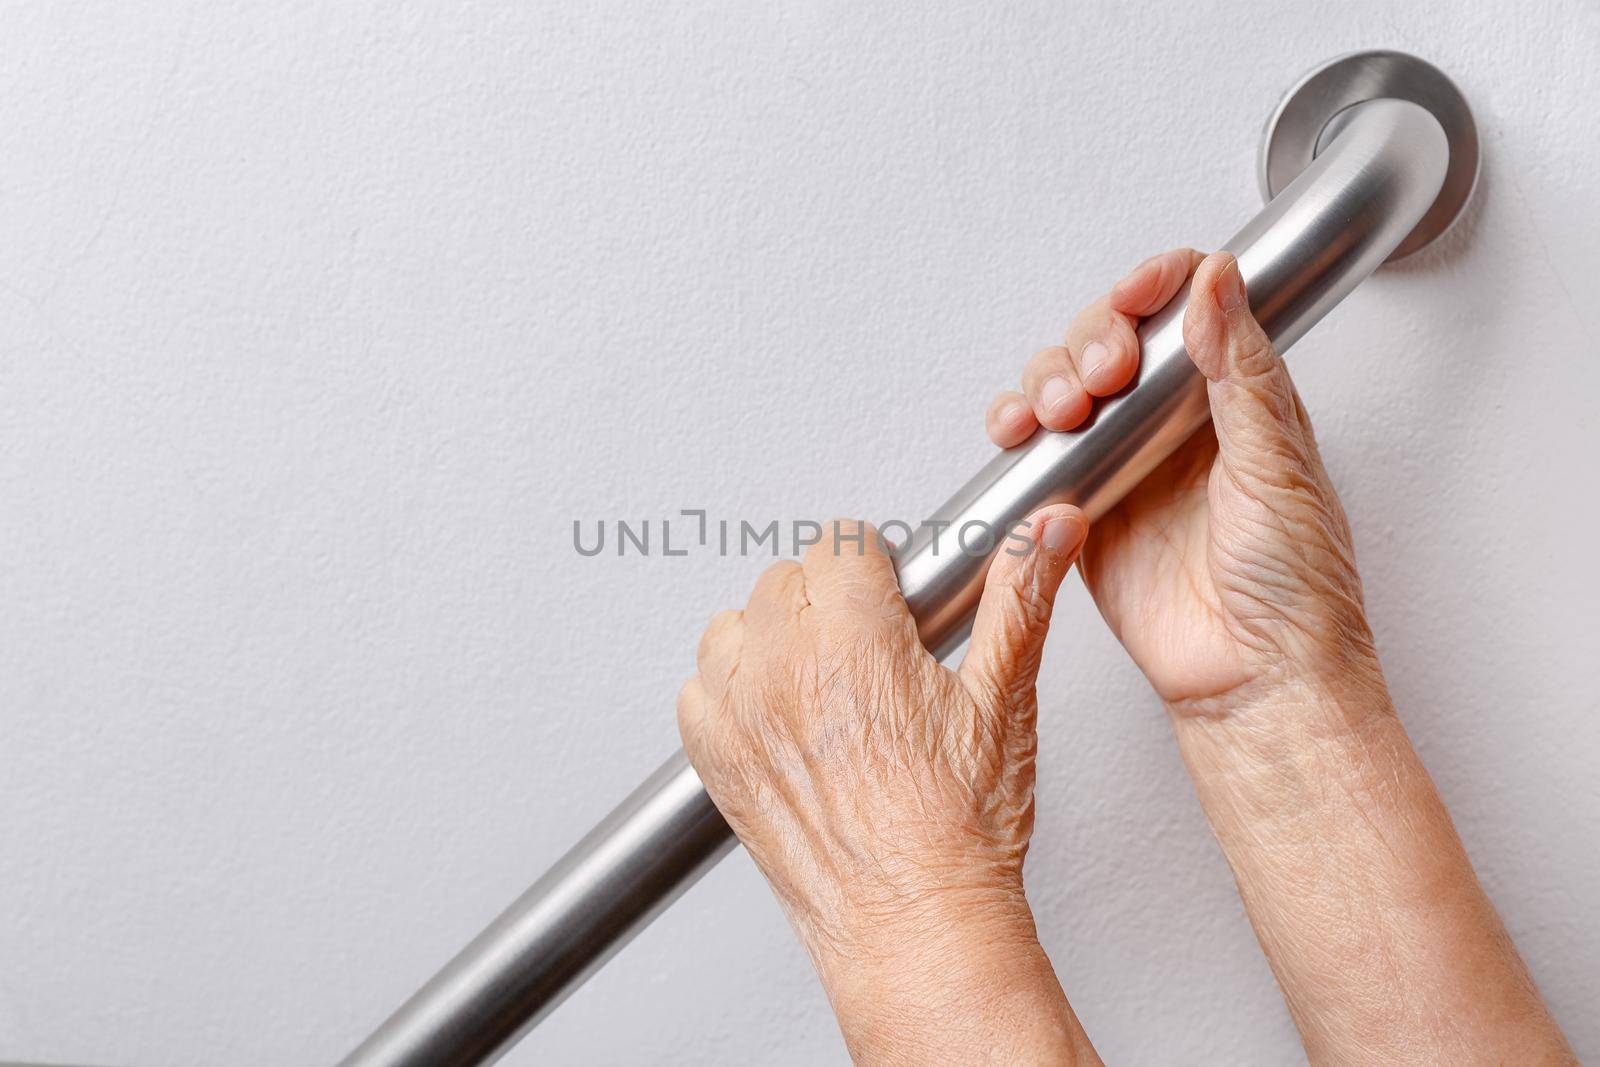 Elderly woman holding on handrail for safety walk steps by toa55